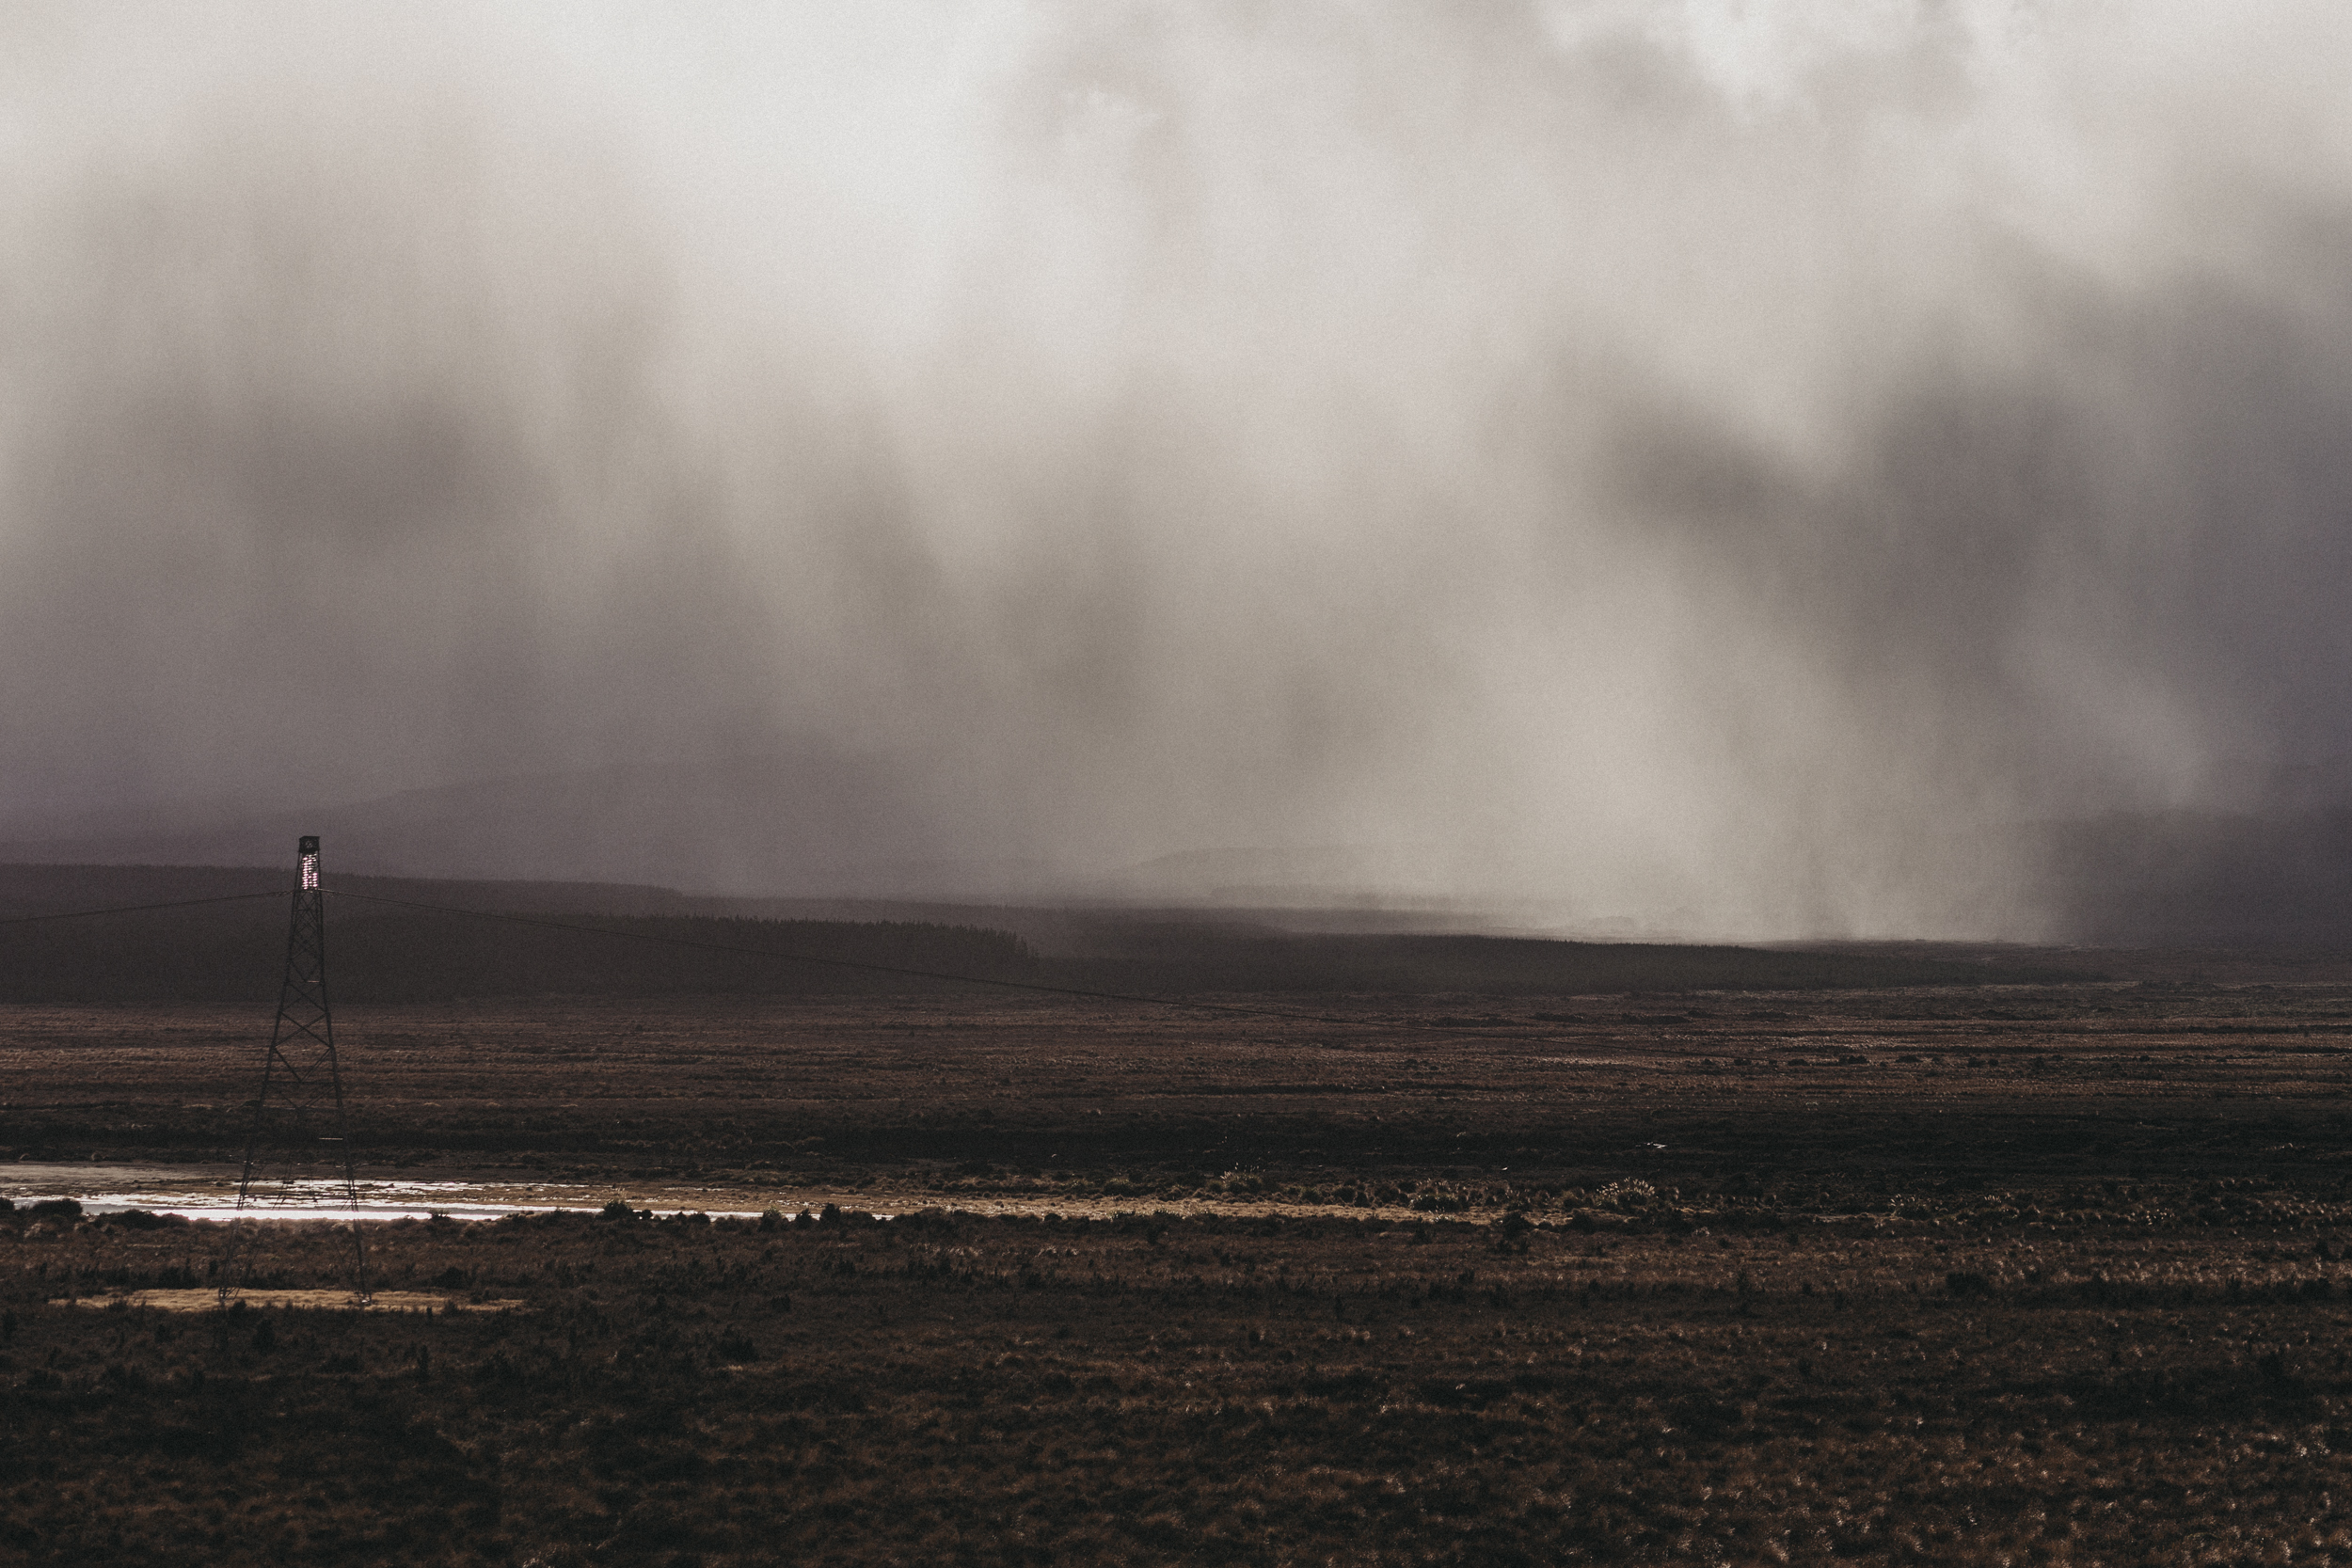 A storm coming in quickly from Desert Road, Mount Tongariro.